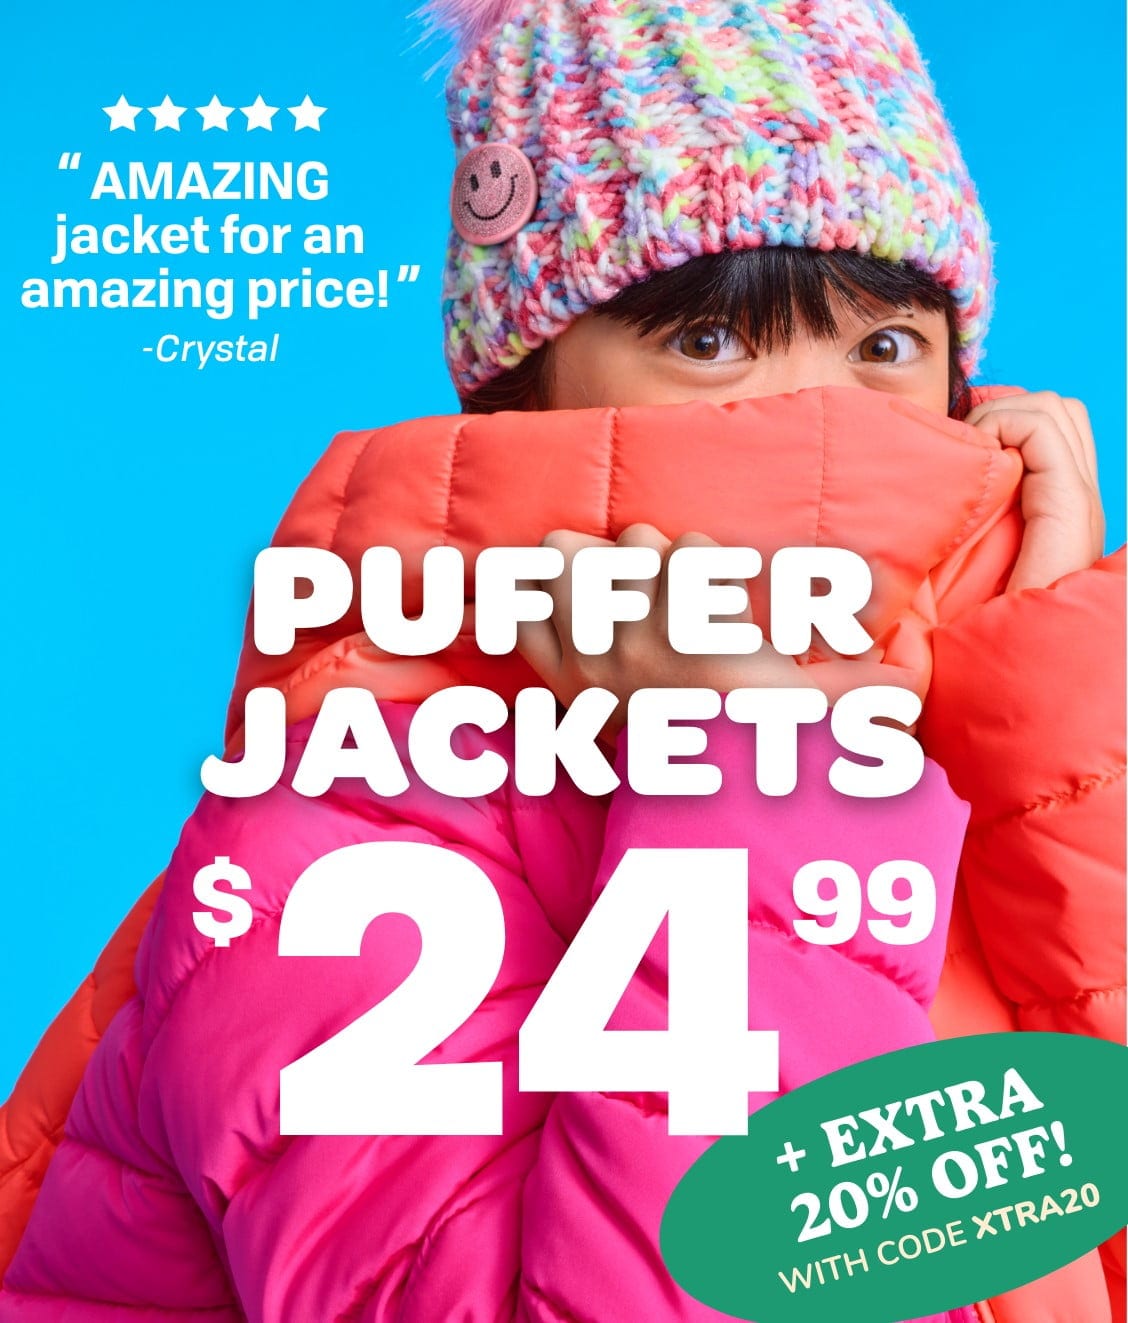 Limited Time Only! Puffer Palooza! $19.99